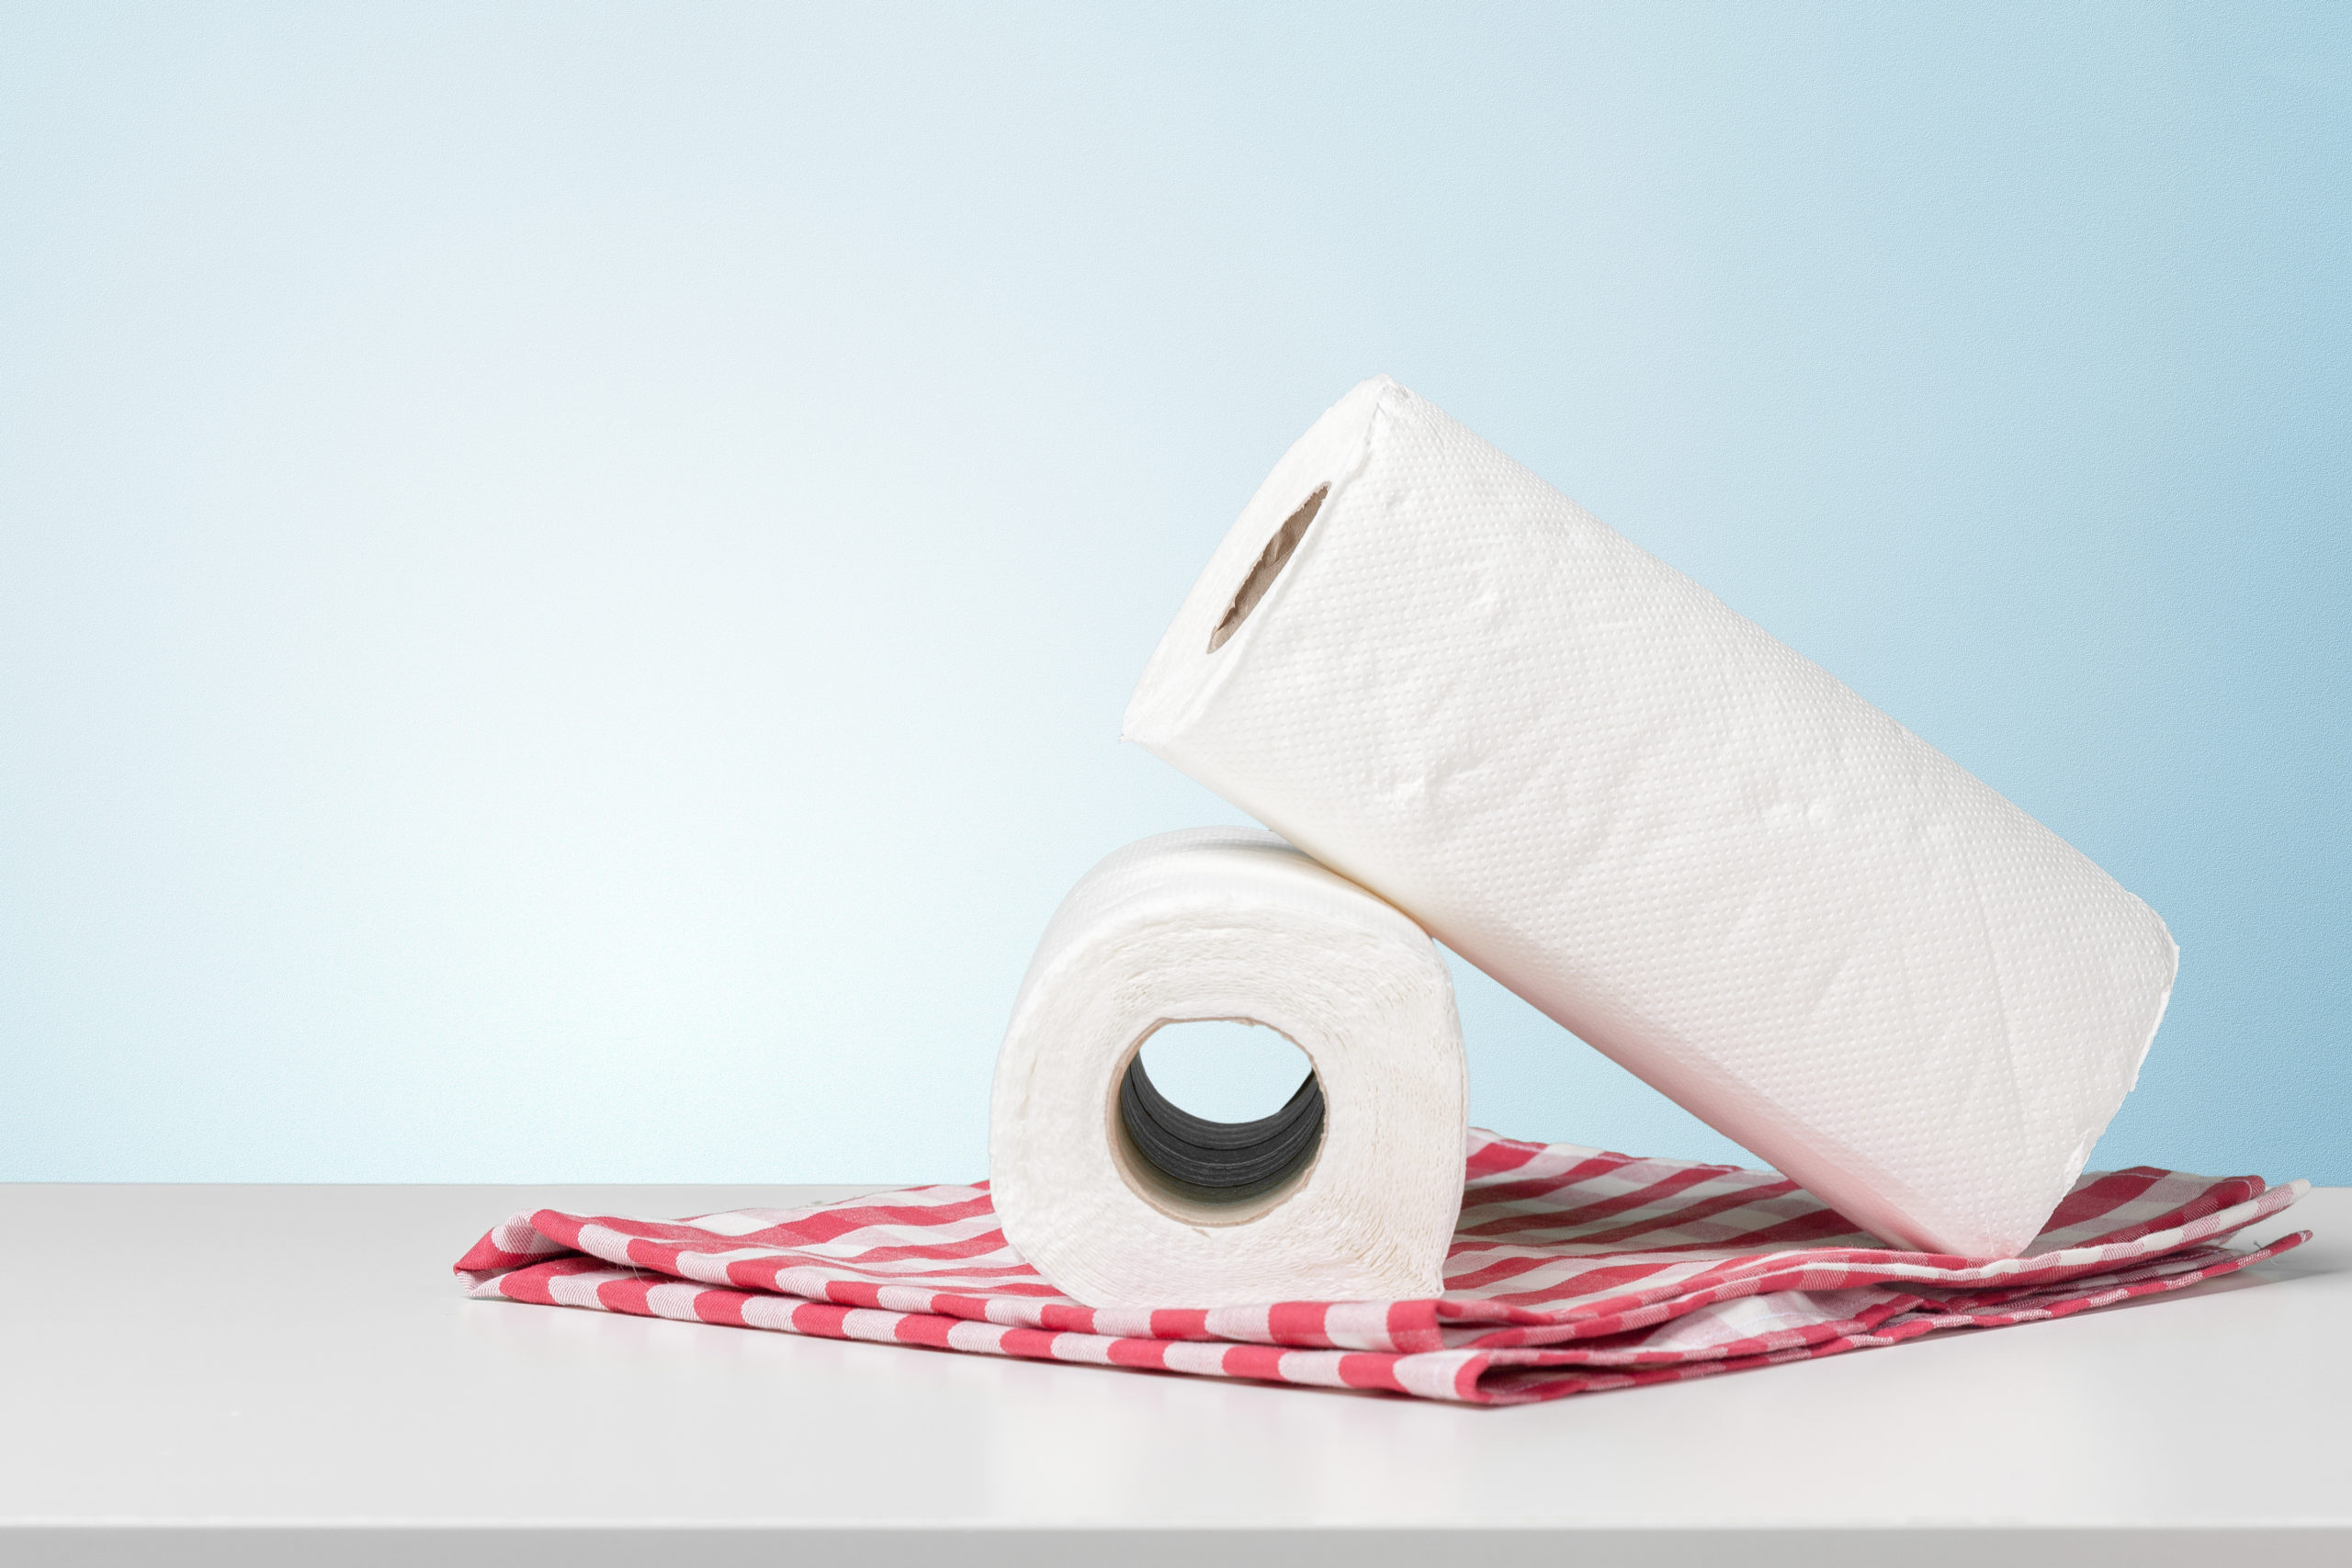 Paper Towels vs. Cloths: How to Choose Which to Stock as a Distributor